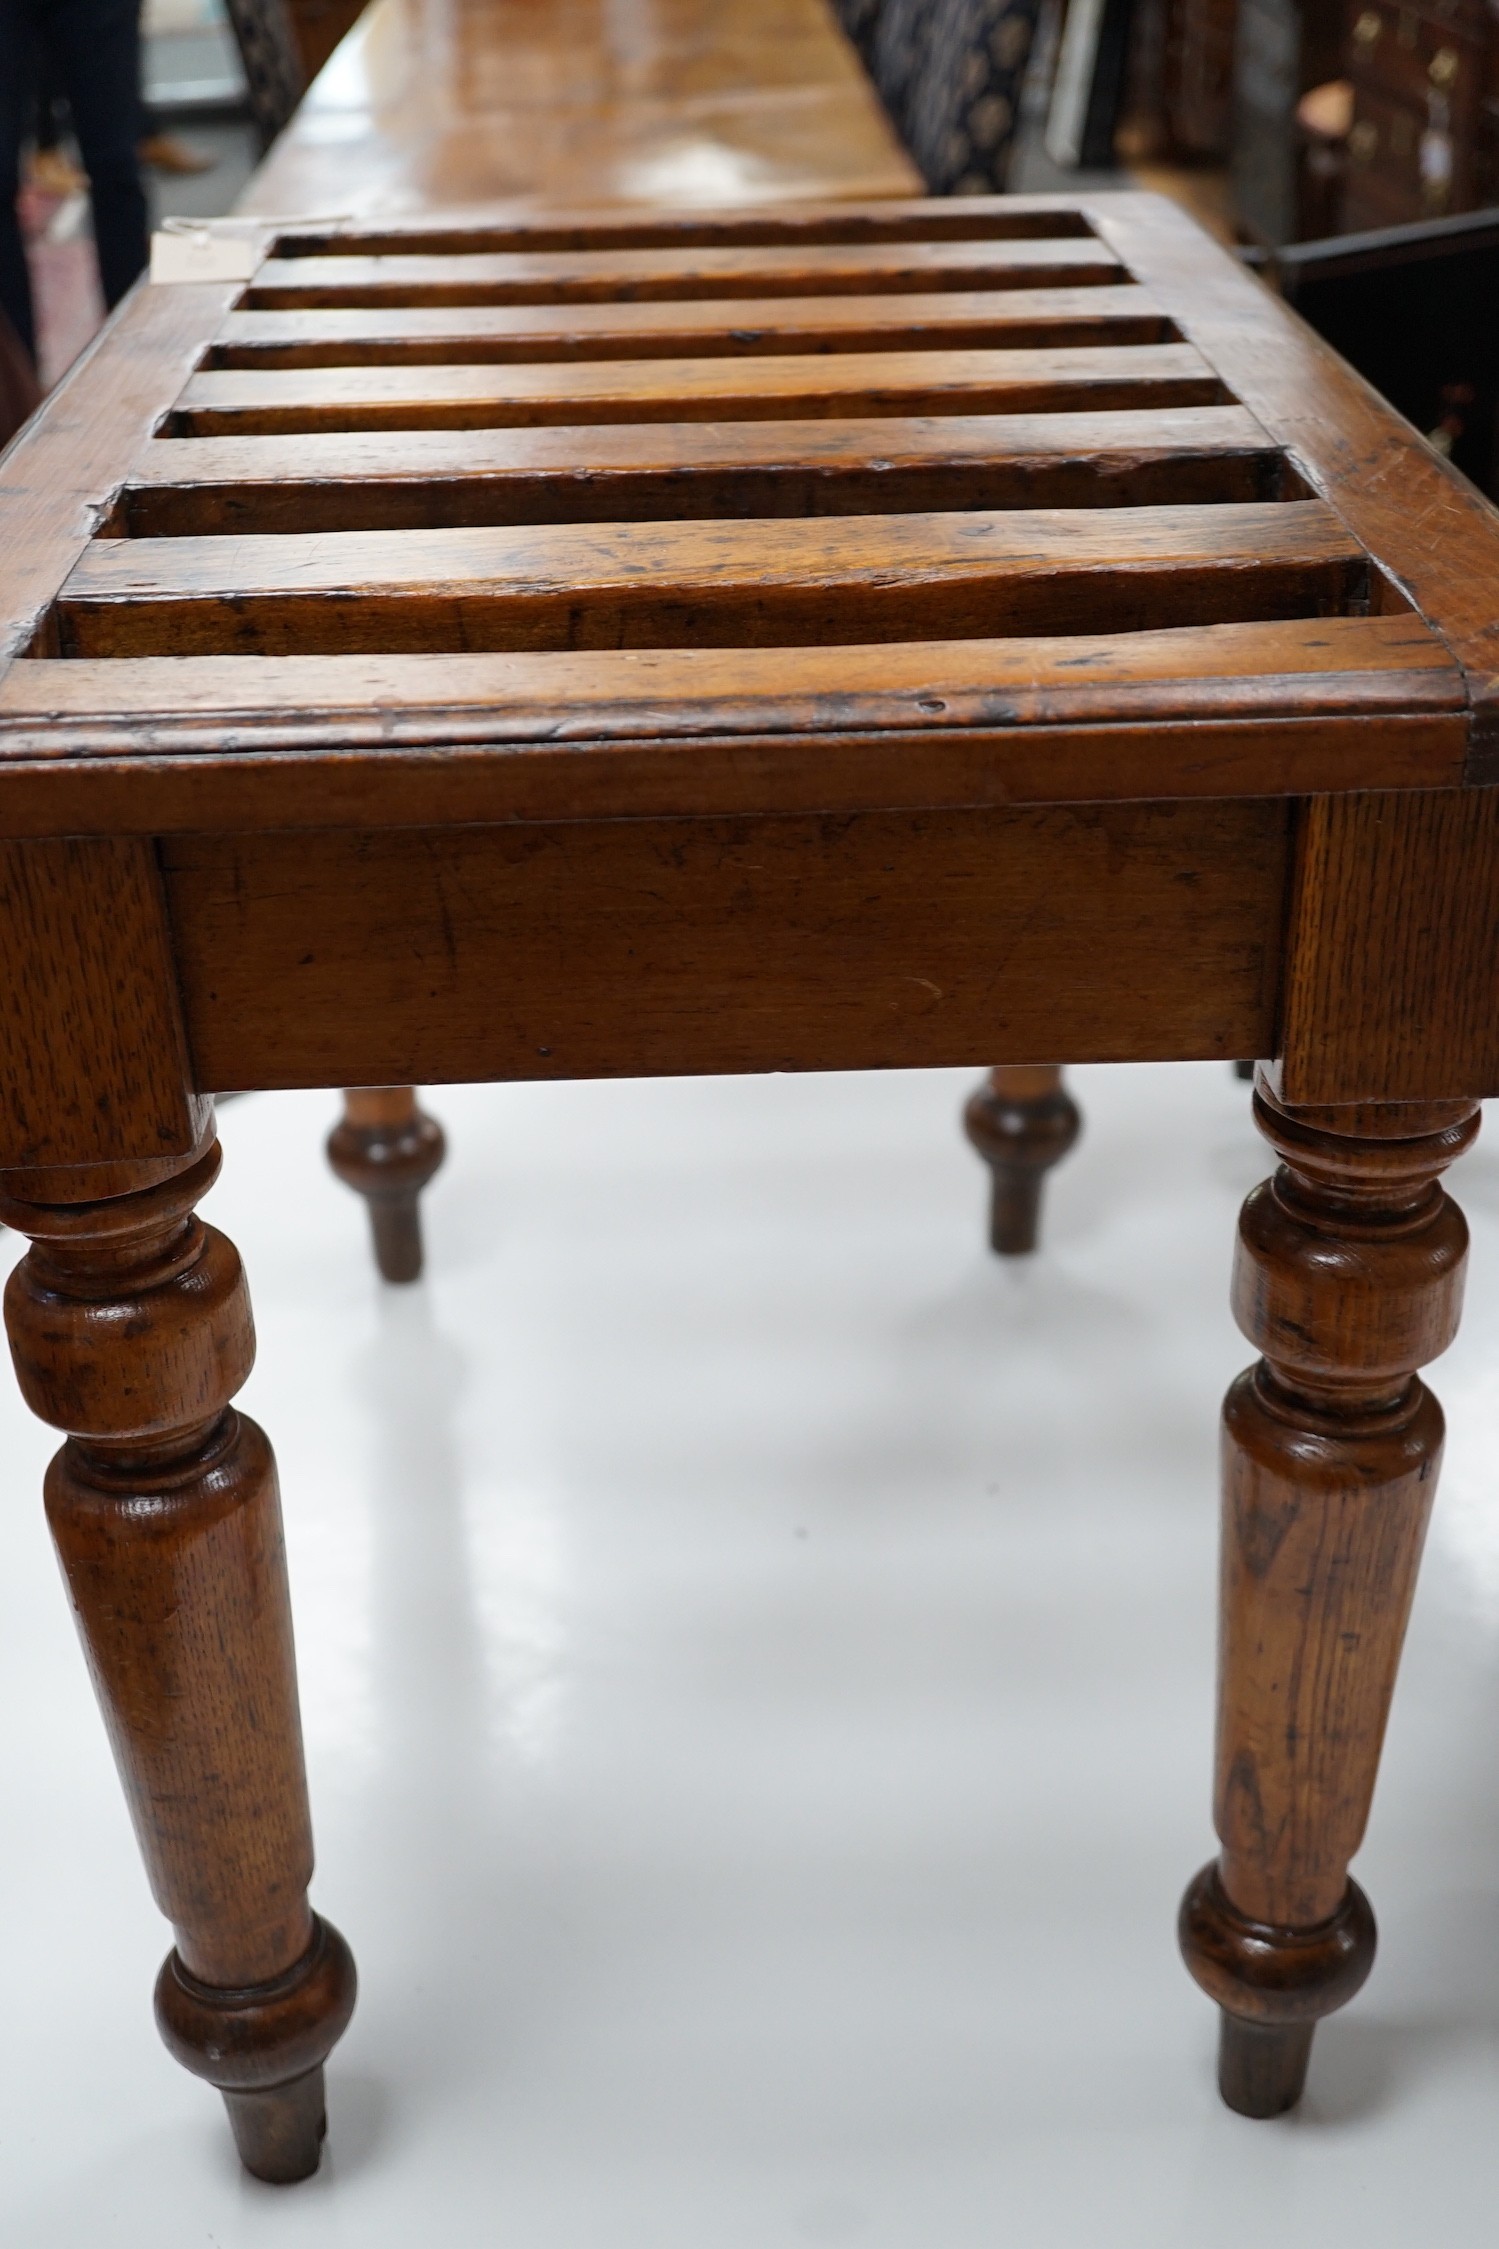 An Edwardian oak and beech luggage rack, width 60cm *Please note the sale commences at 9am.